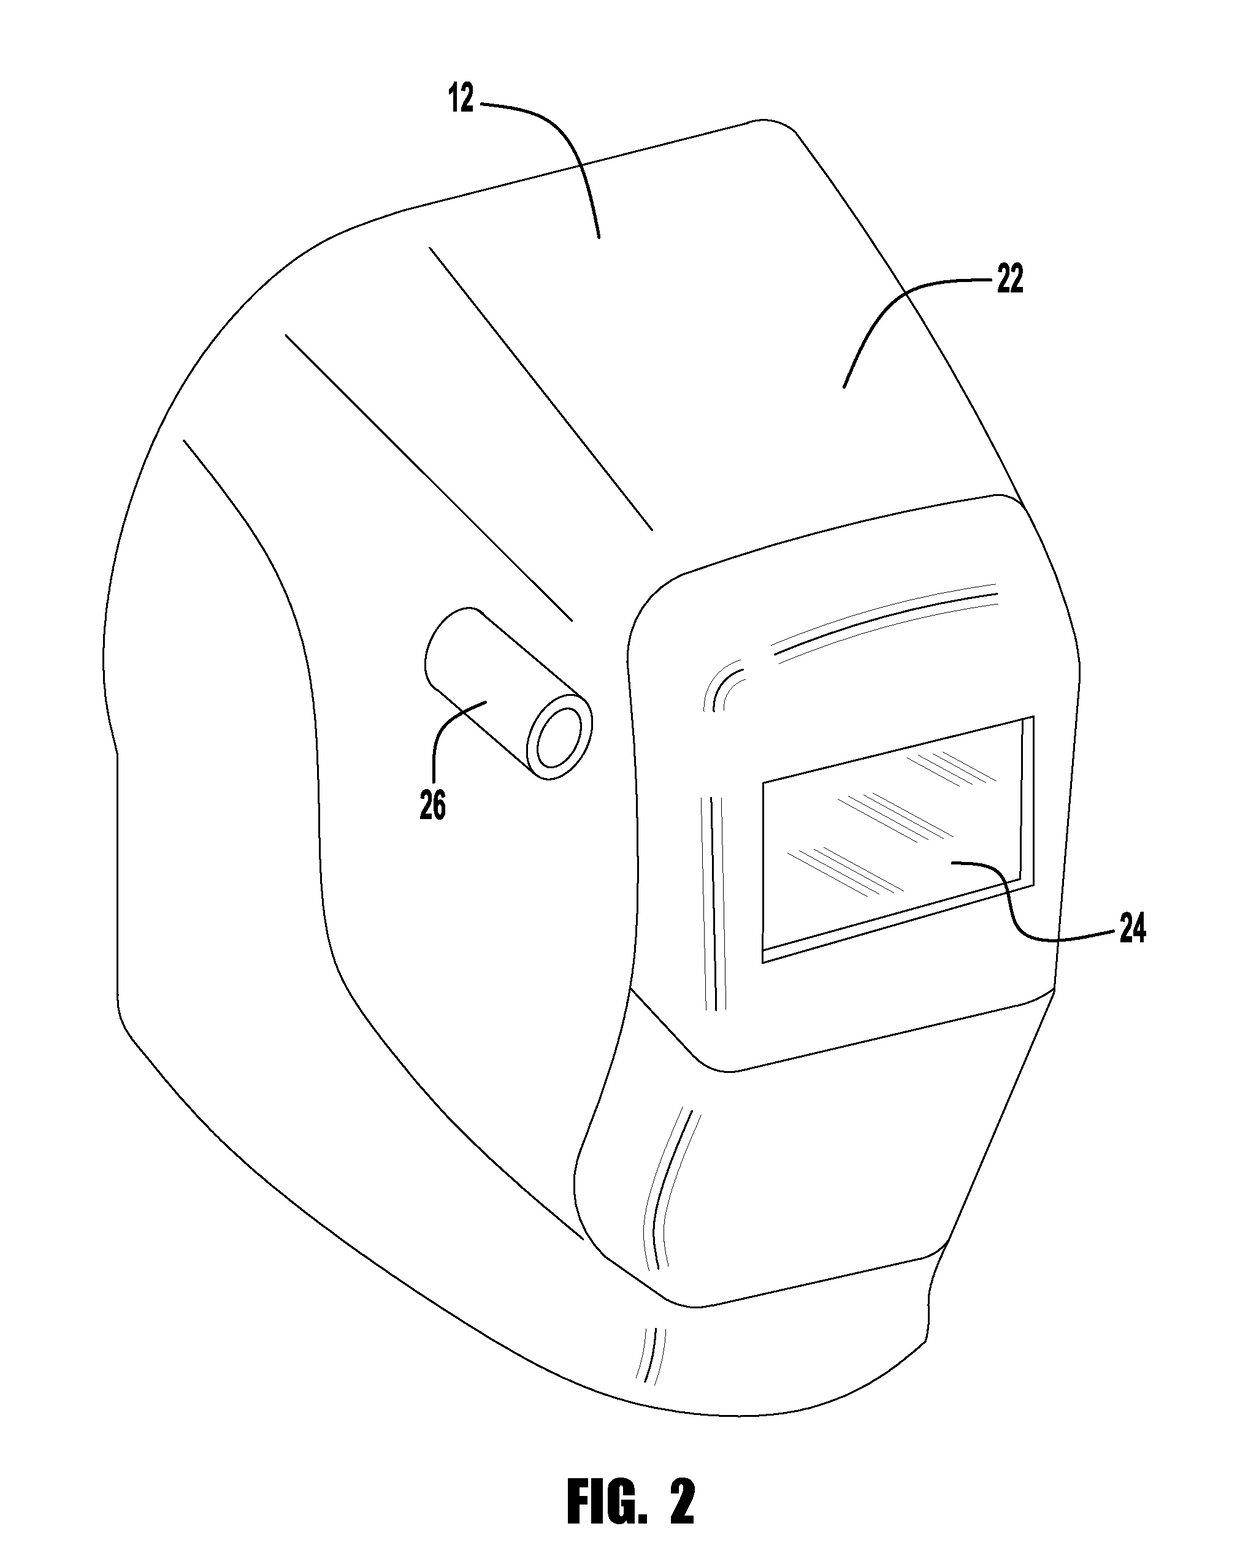 Welding system providing visual and audio cues to a welding helmet with a display